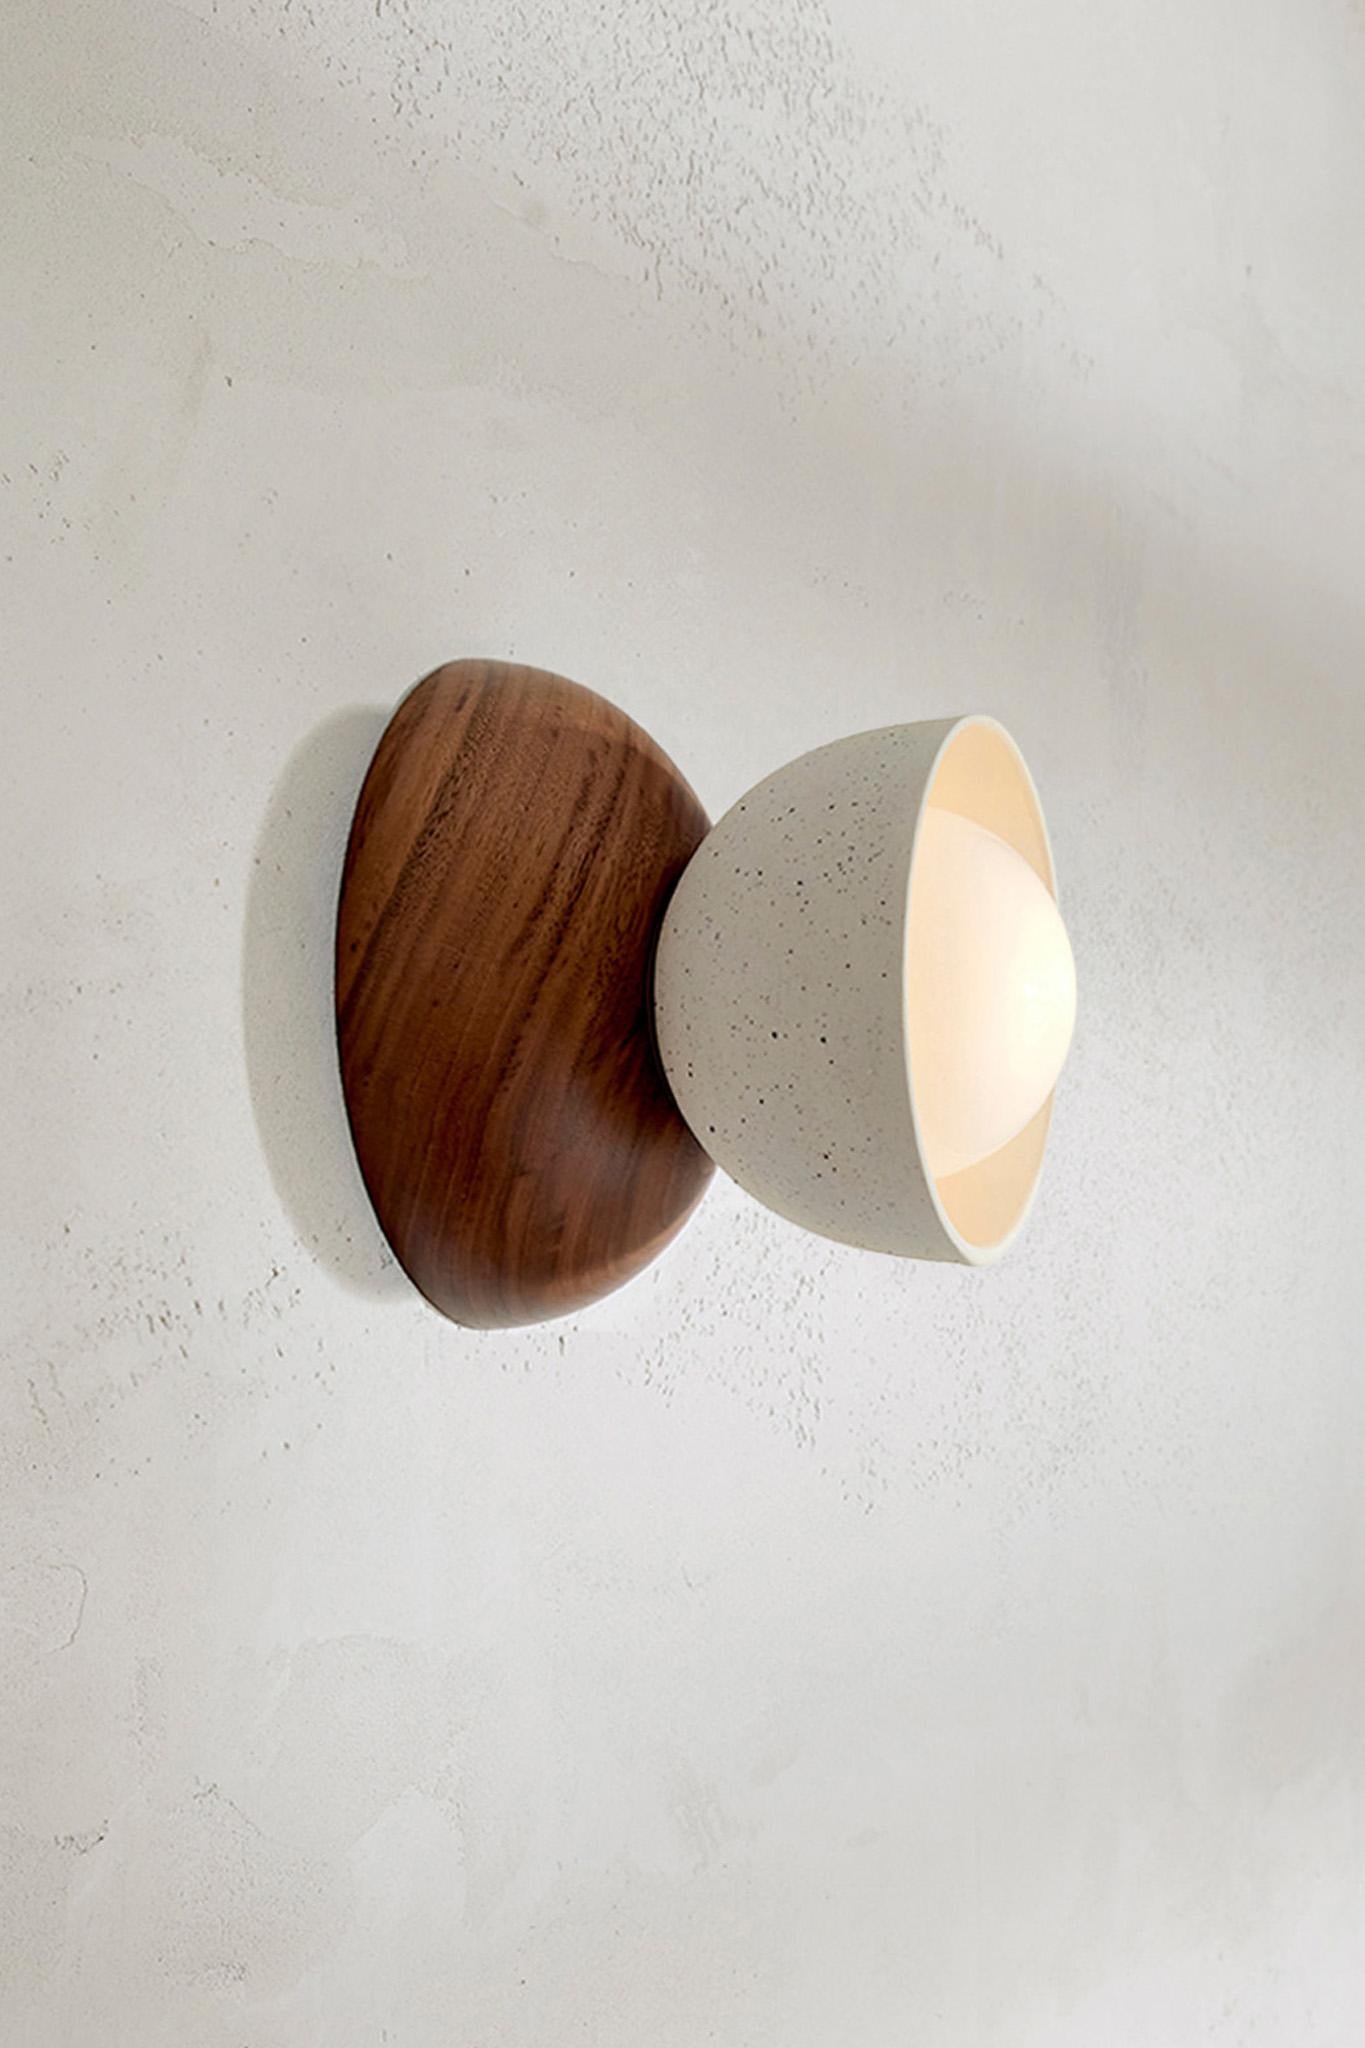 Australian Marz Designs, “Terra 00 Surface Sconce”, Ceramic and Timber Surface Sconce For Sale